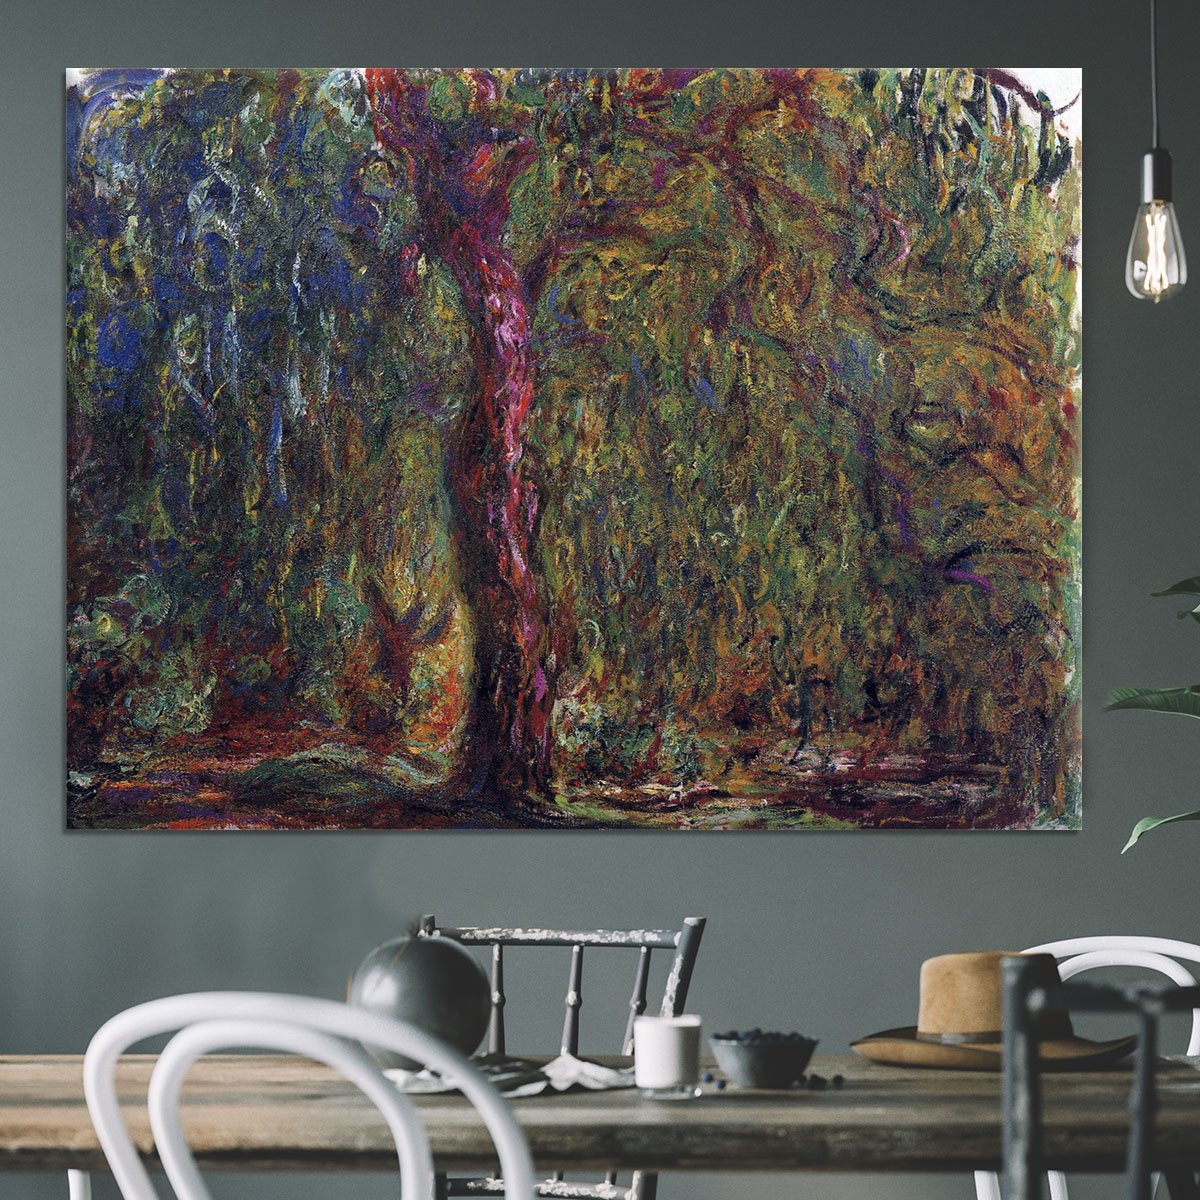 Weeping willow by Monet Canvas Print or Poster